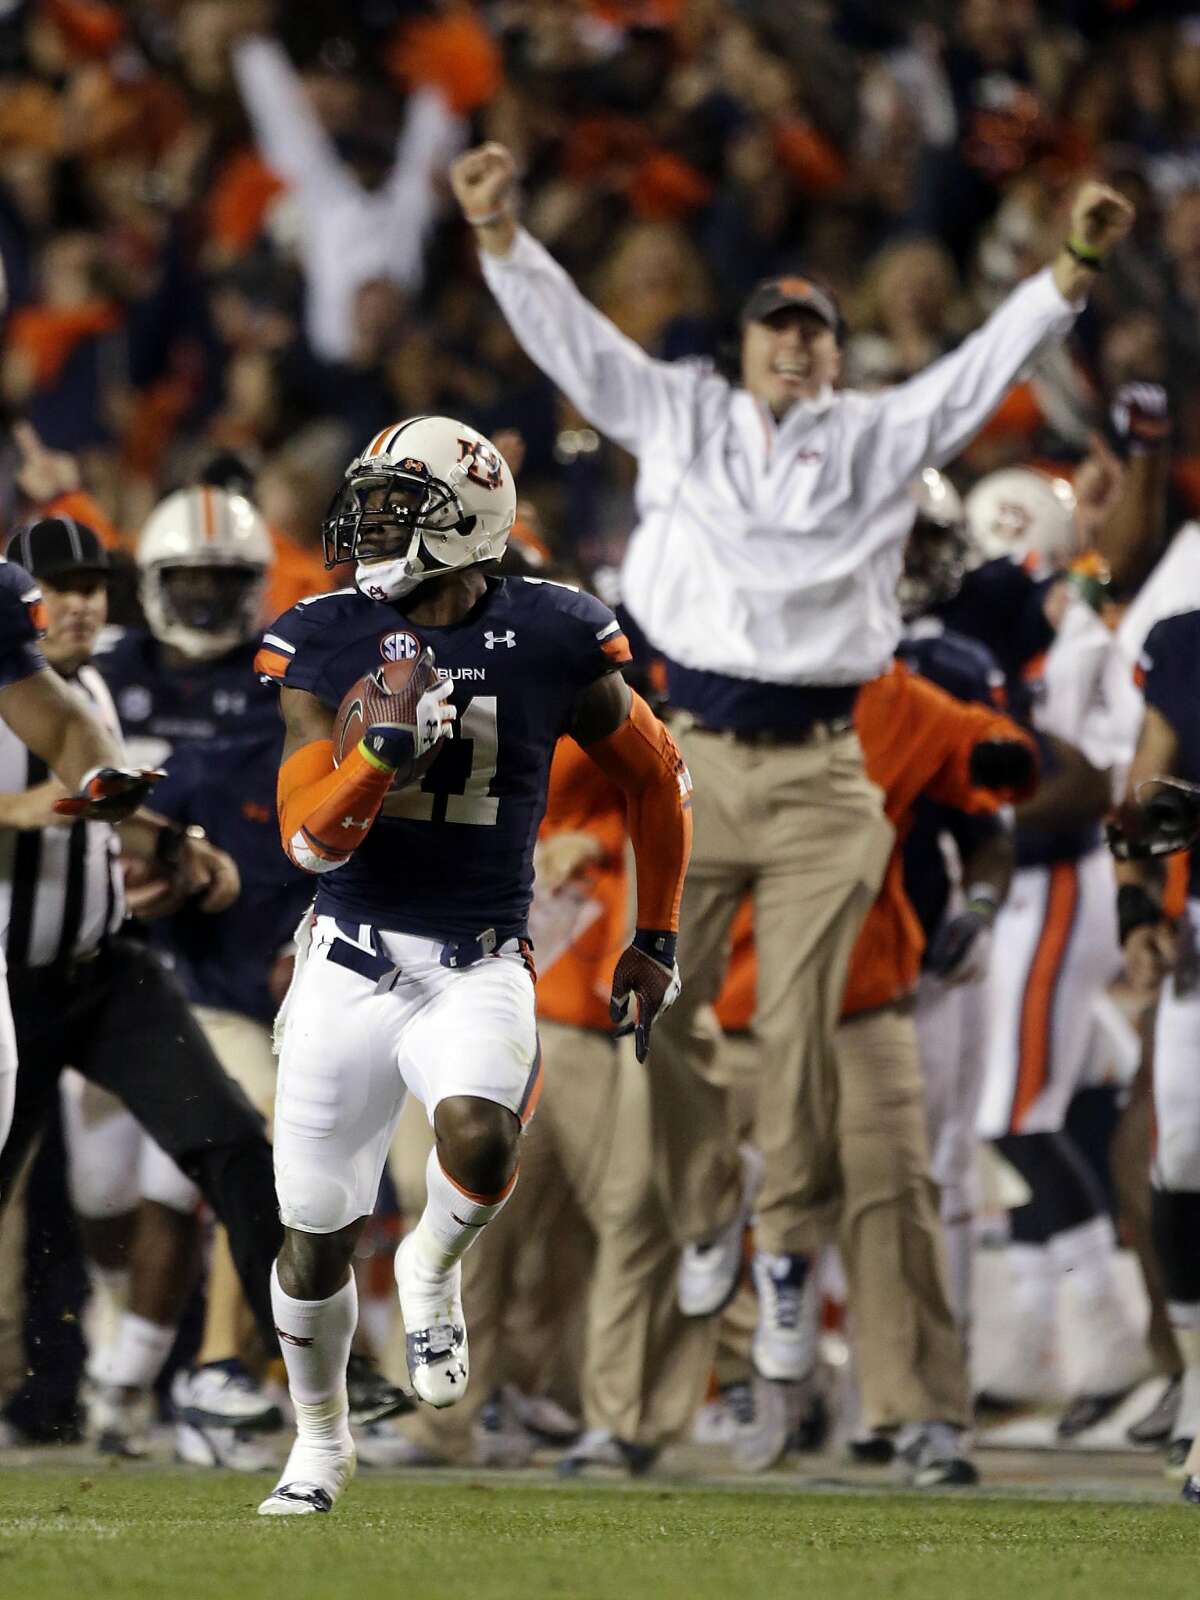 Auburn cornerback Chris Davis (11) returns a missed field goal attempt 100-plus yards to score the game-winning touchdown as time expired in the fourth quarter of an NCAA college football game against No. 1 Alabama in Auburn, Ala., Saturday, Nov. 30, 2013. Auburn won 34-28. (AP Photo/Dave Martin)